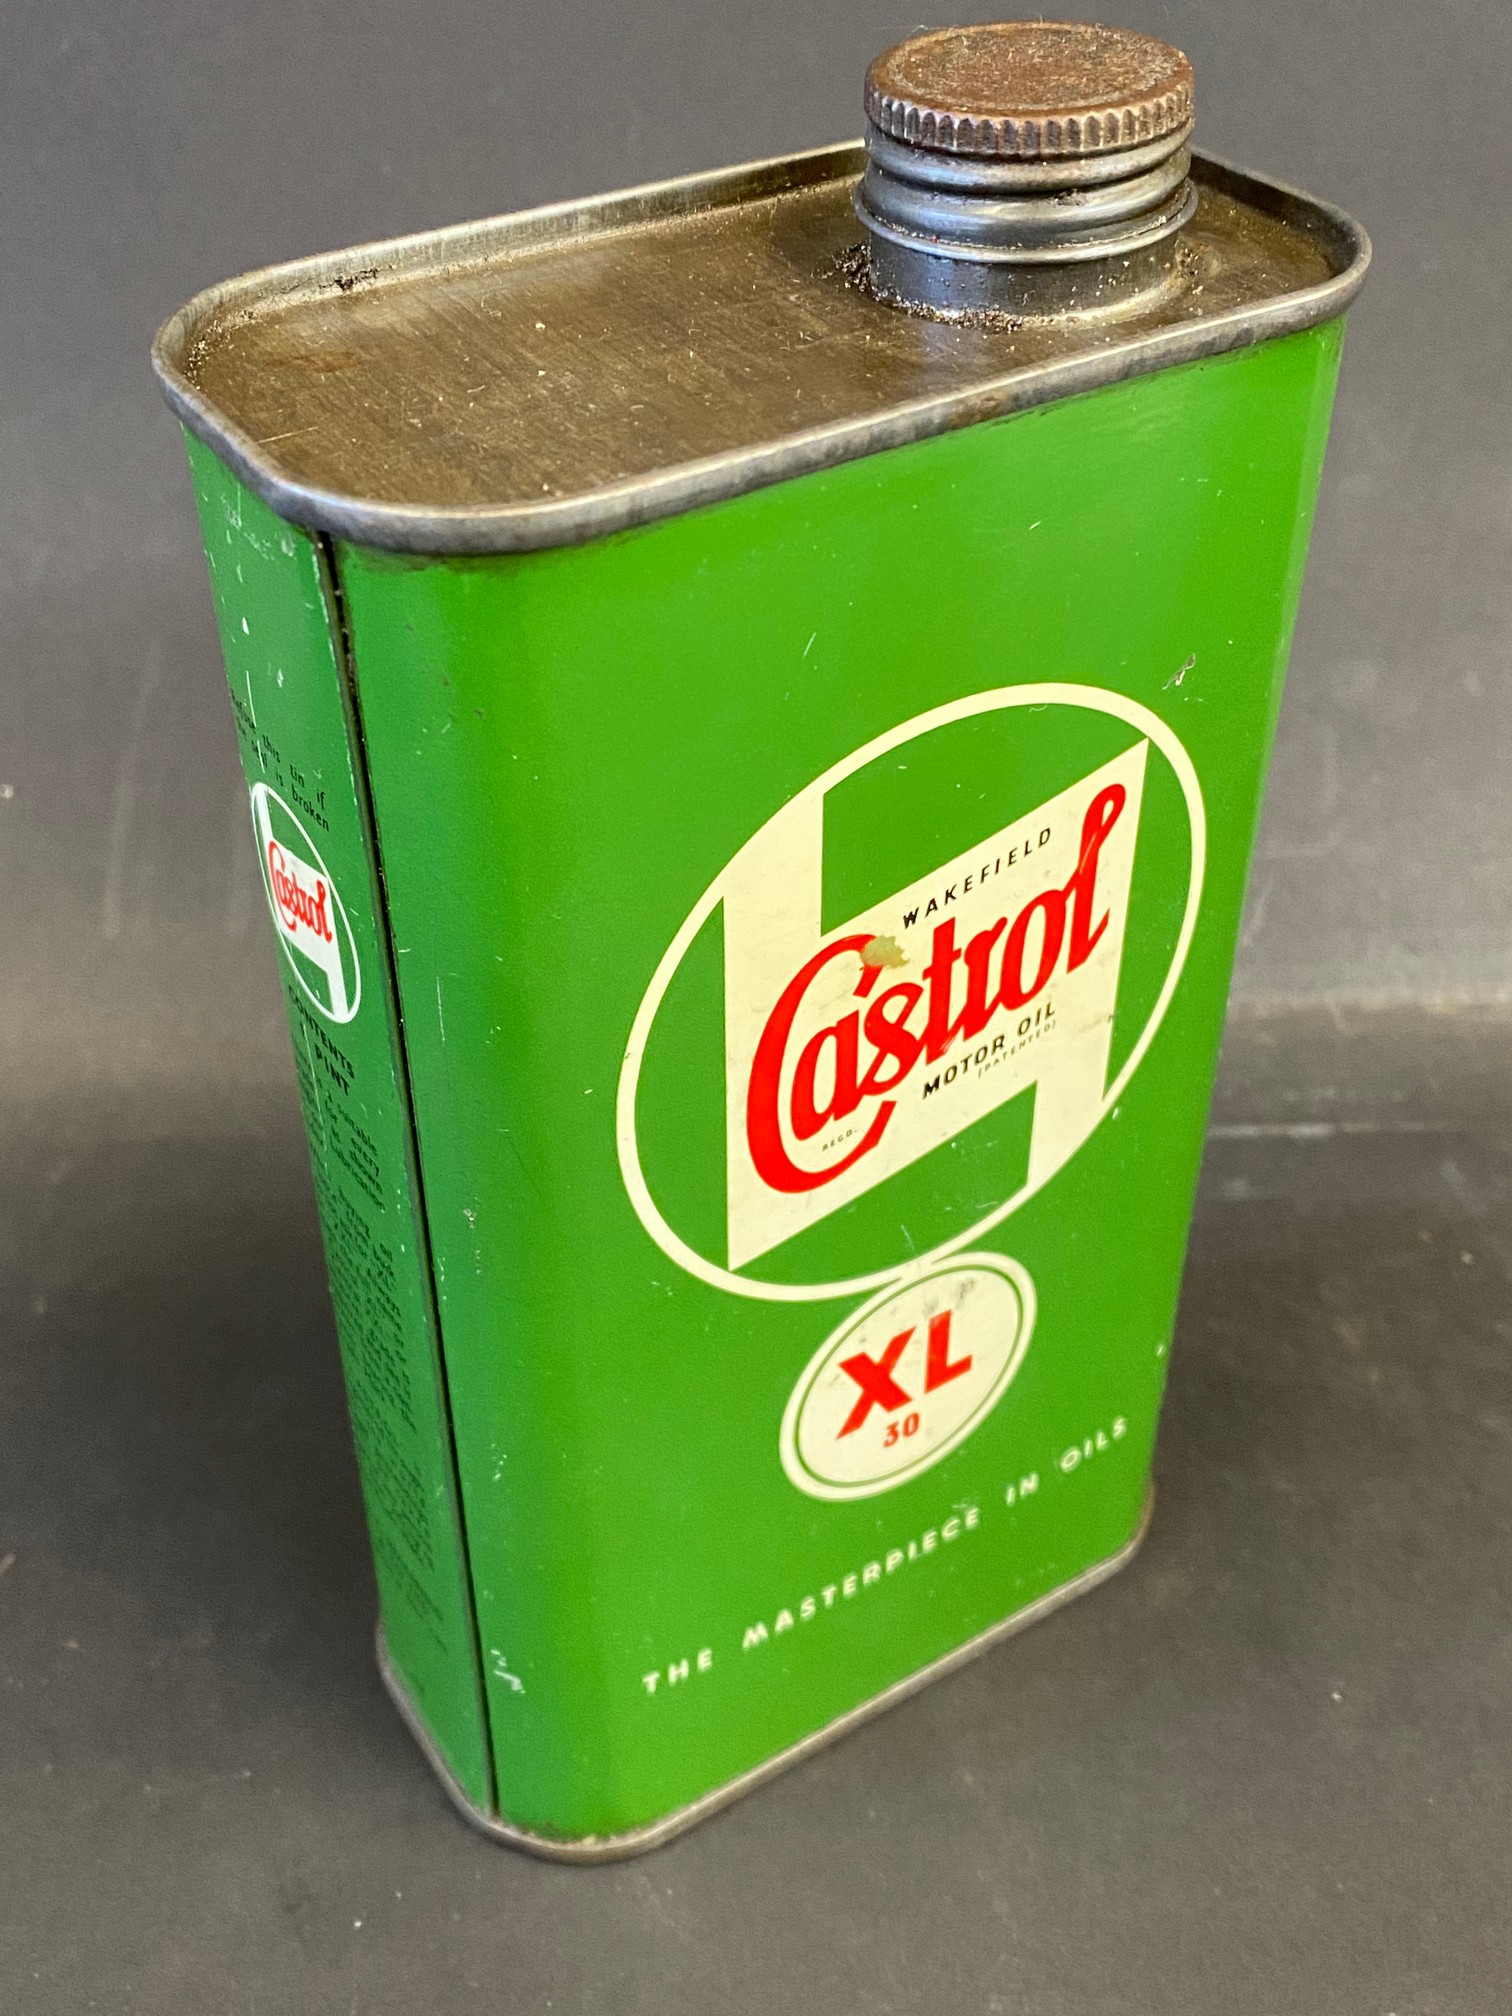 A Wakefield Castrol Motor Oil XL grade pint can, in good condition.